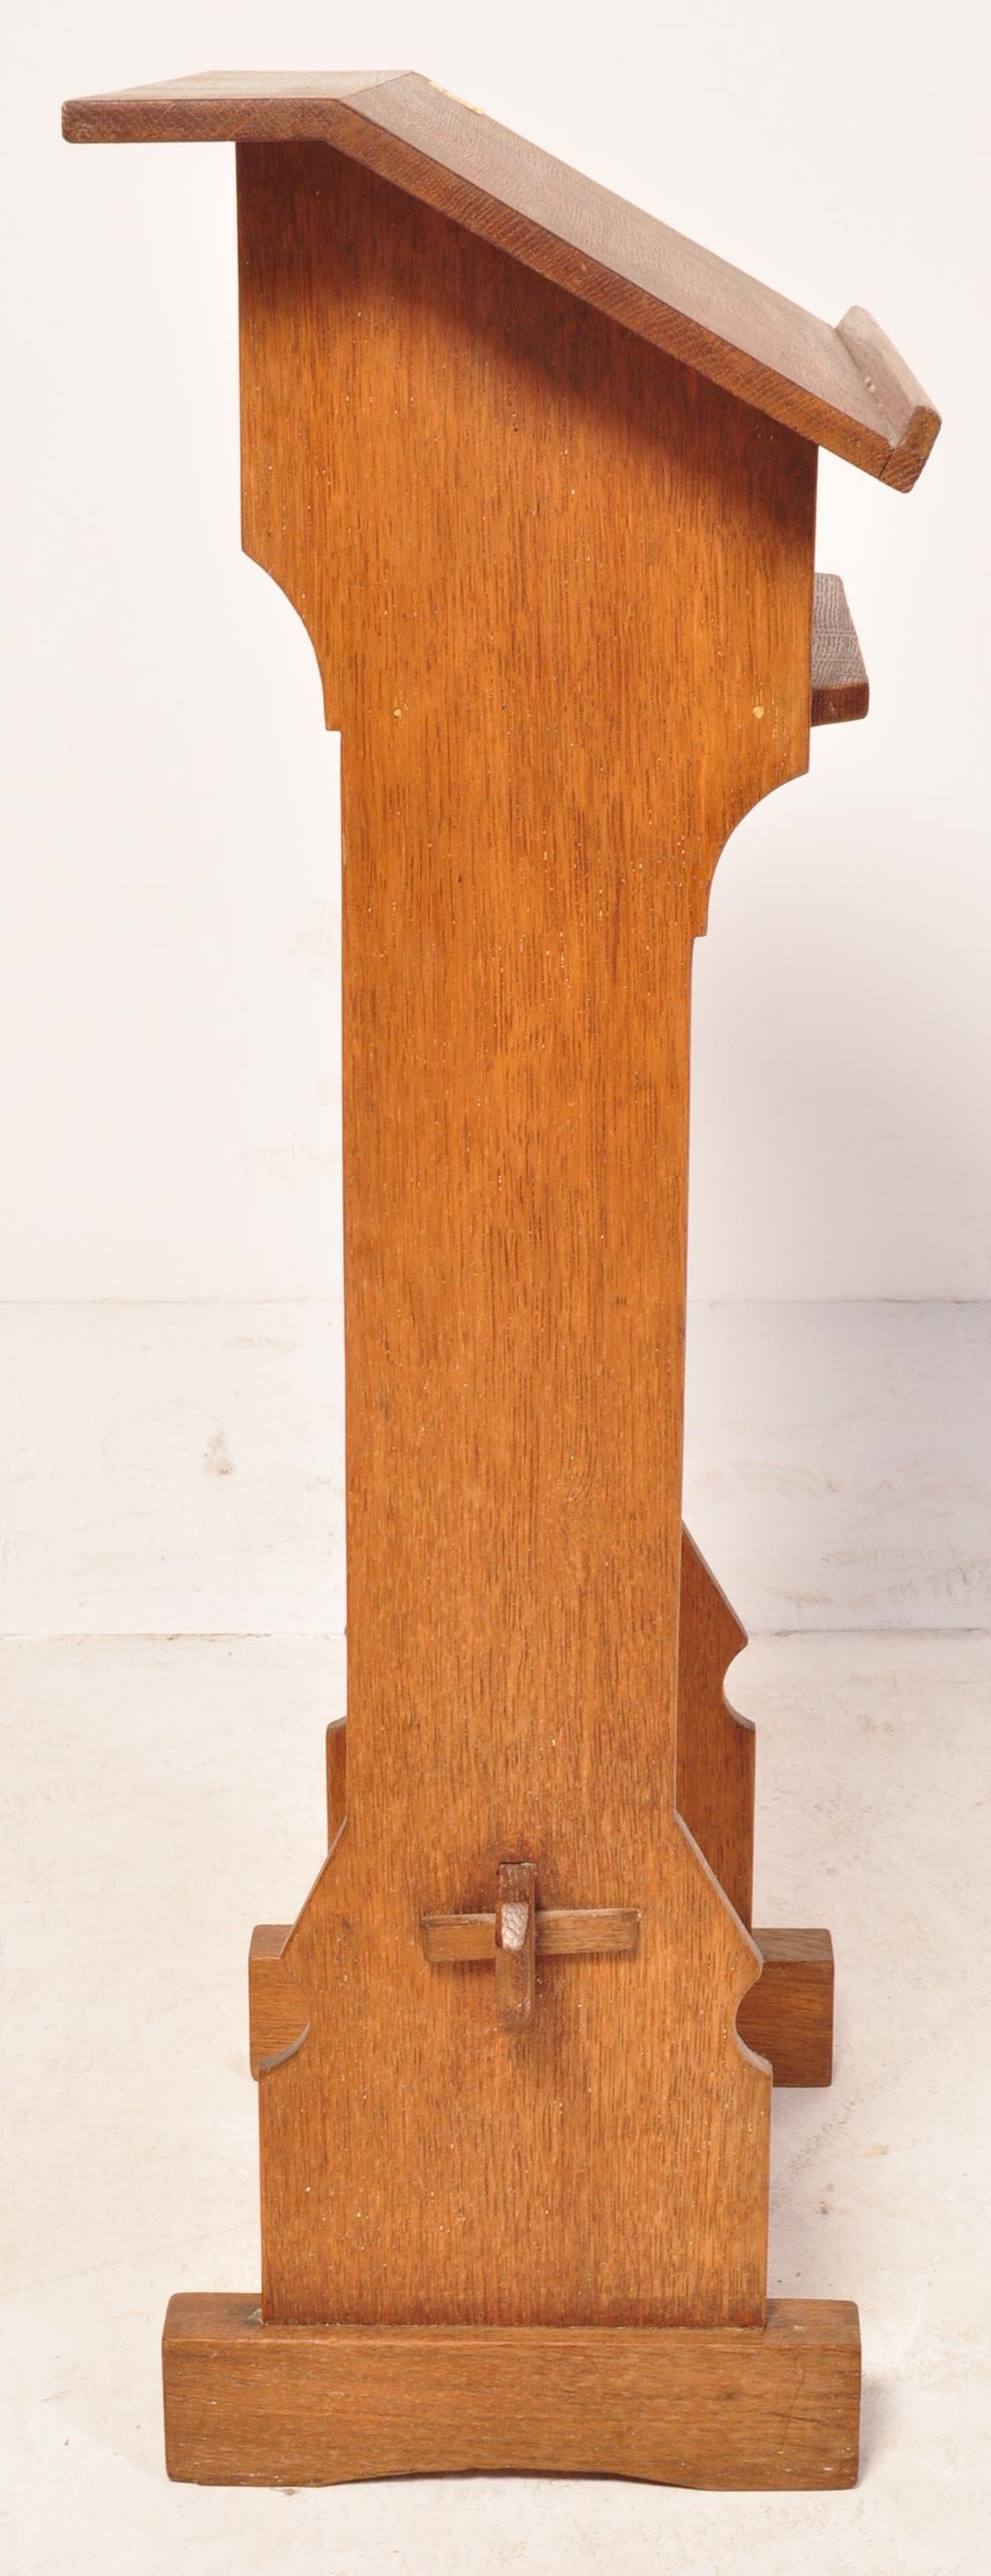 EARLY 20TH CENTURY OAK ECCLESIACTICAL READING LECTERN - Image 5 of 5